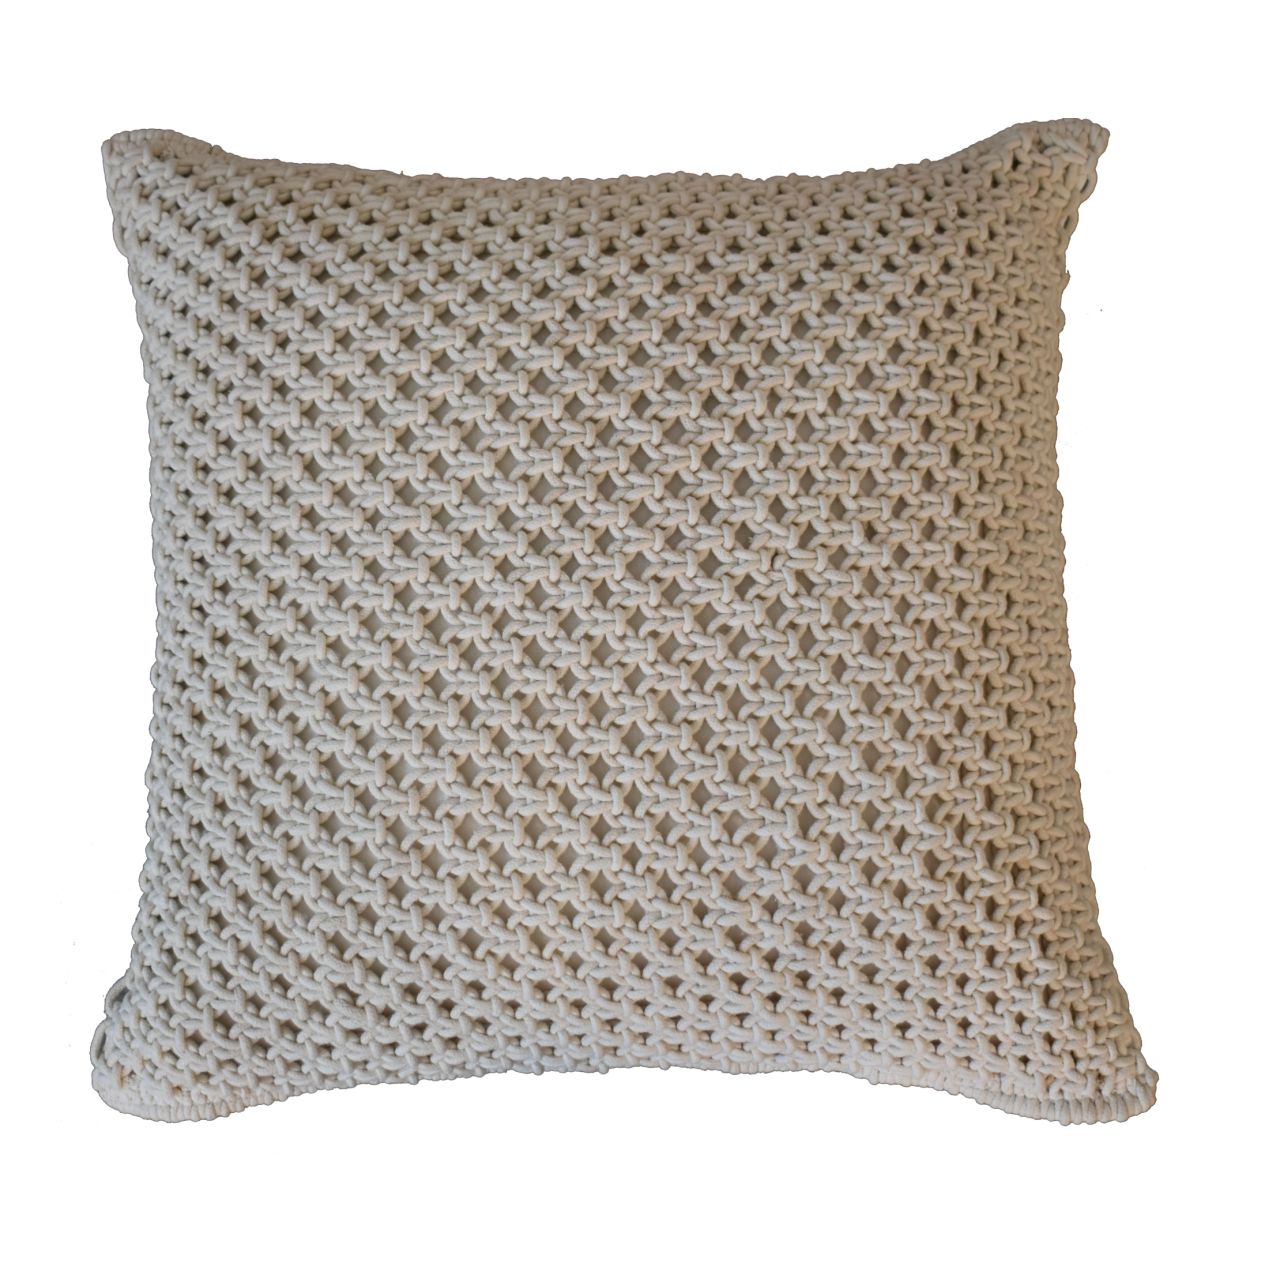 2x Knit Natural White Cushions-product